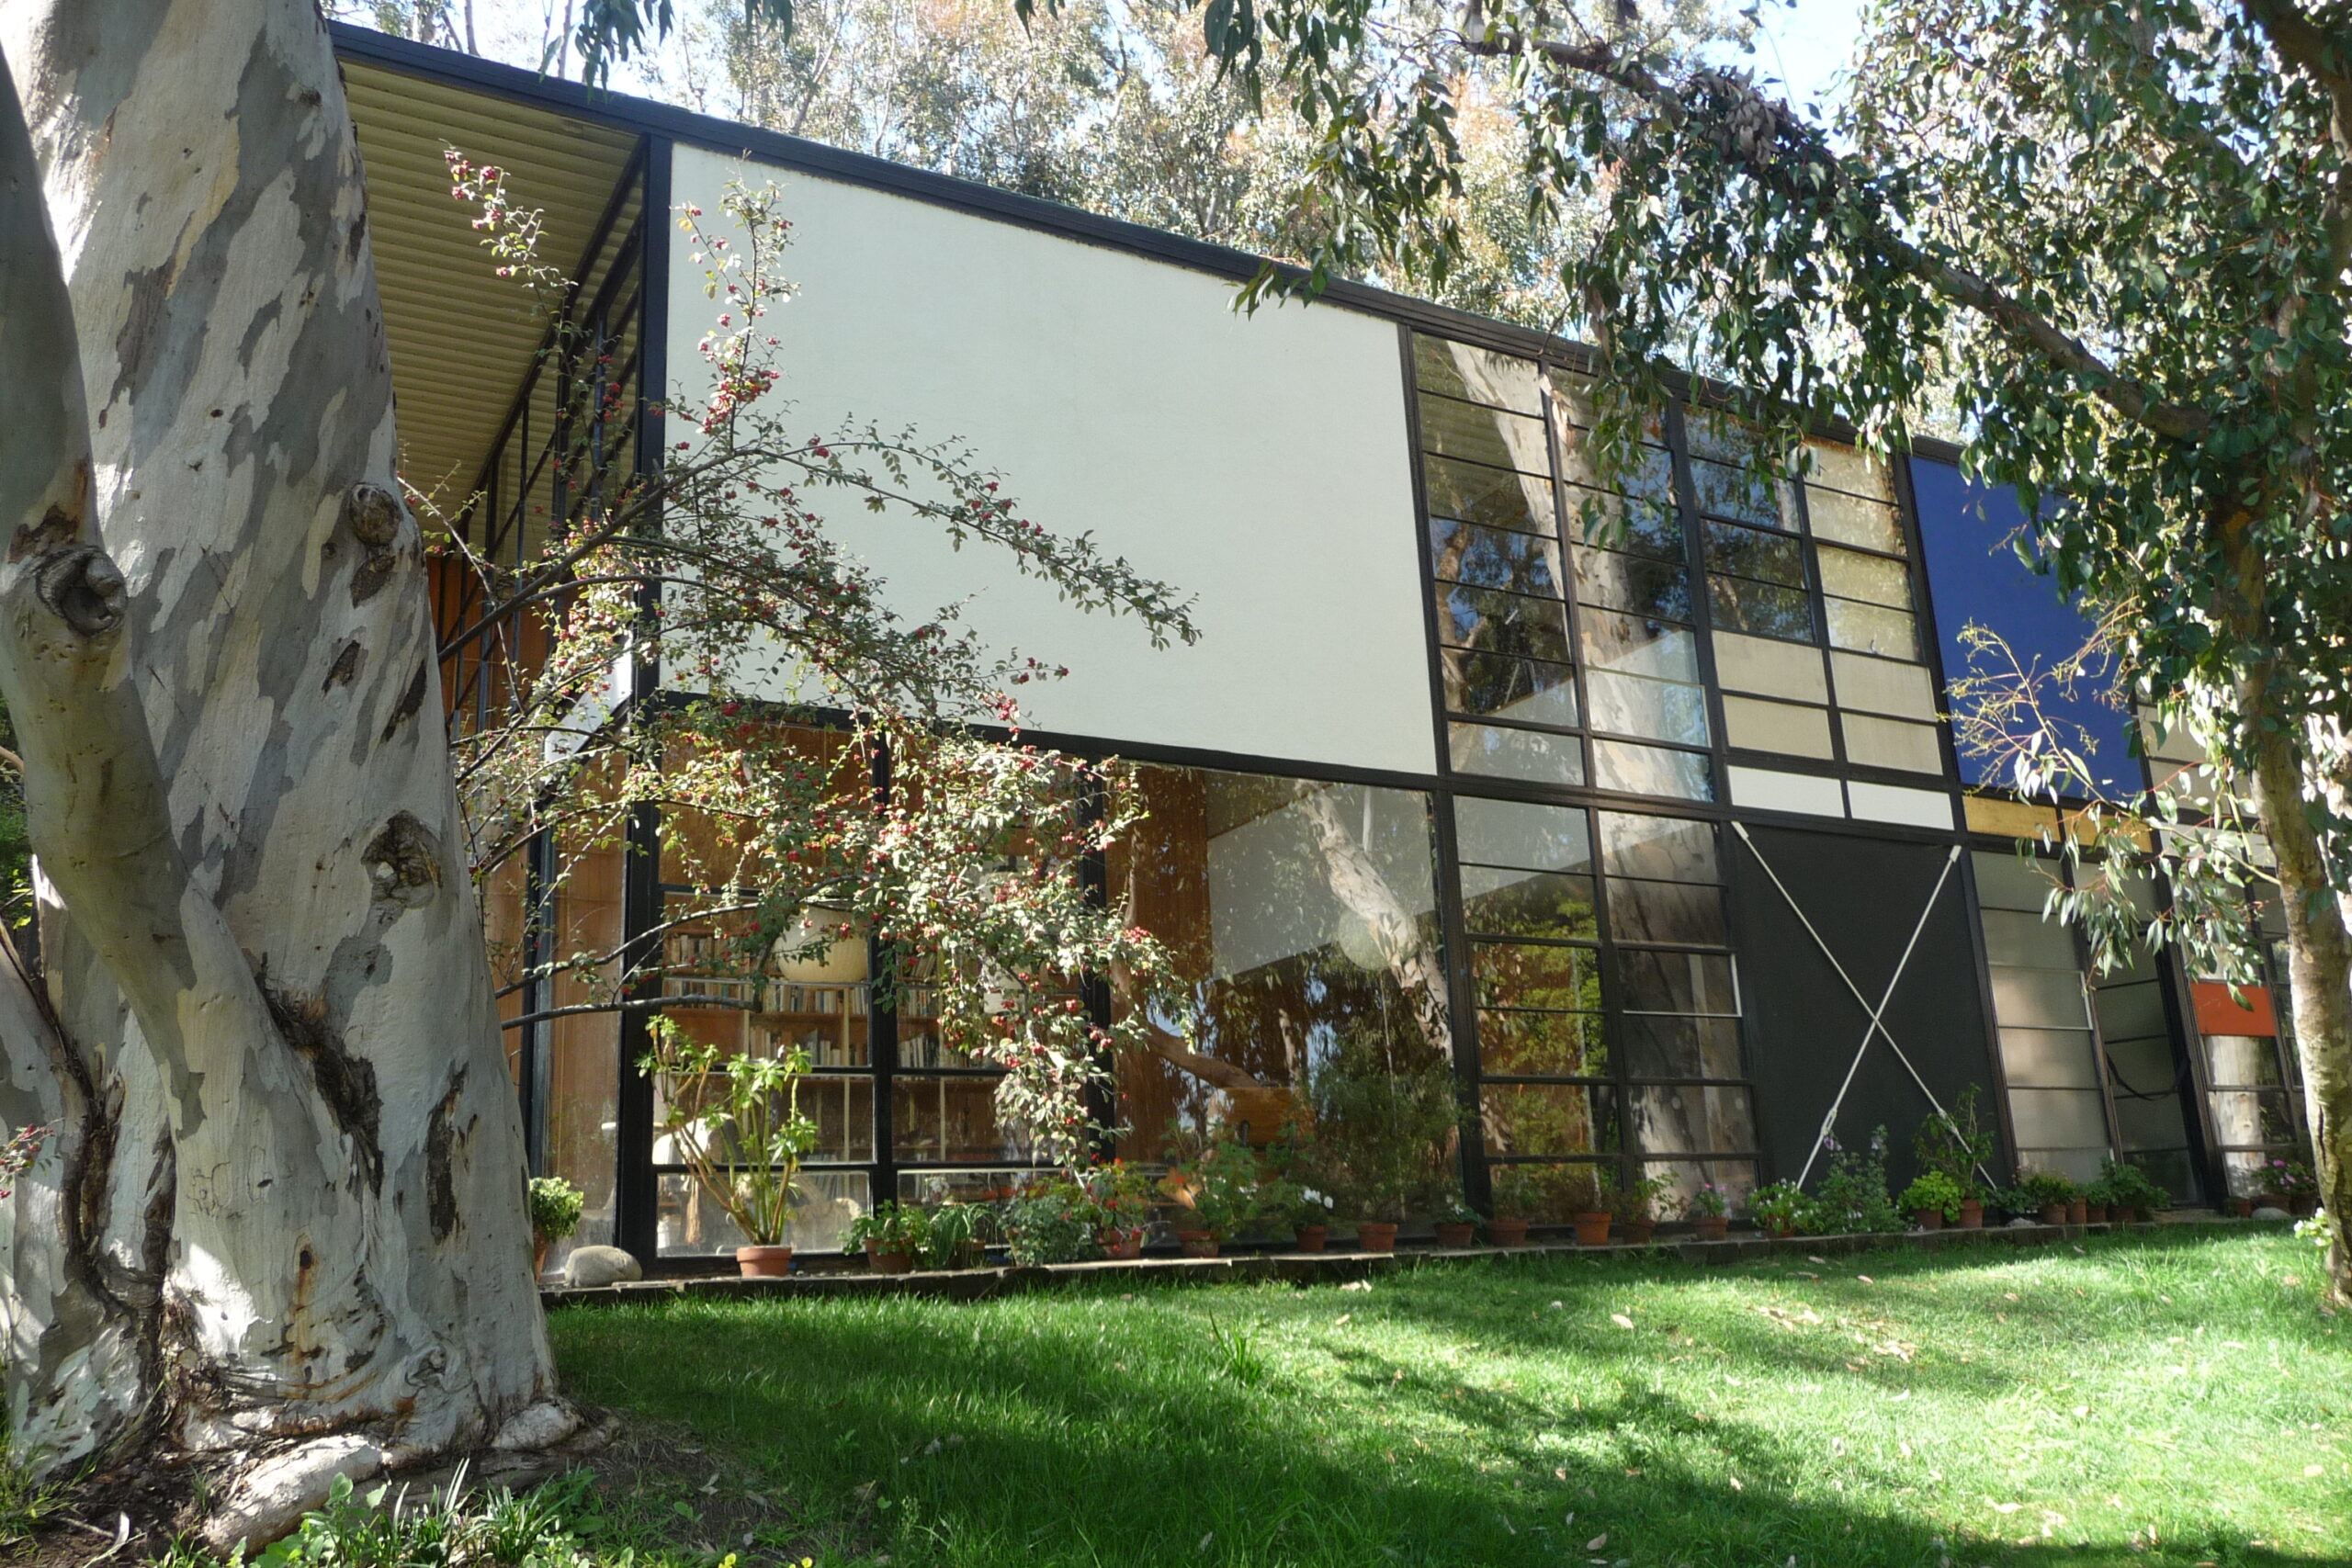 Eames House and Studio (Case Study House #8)